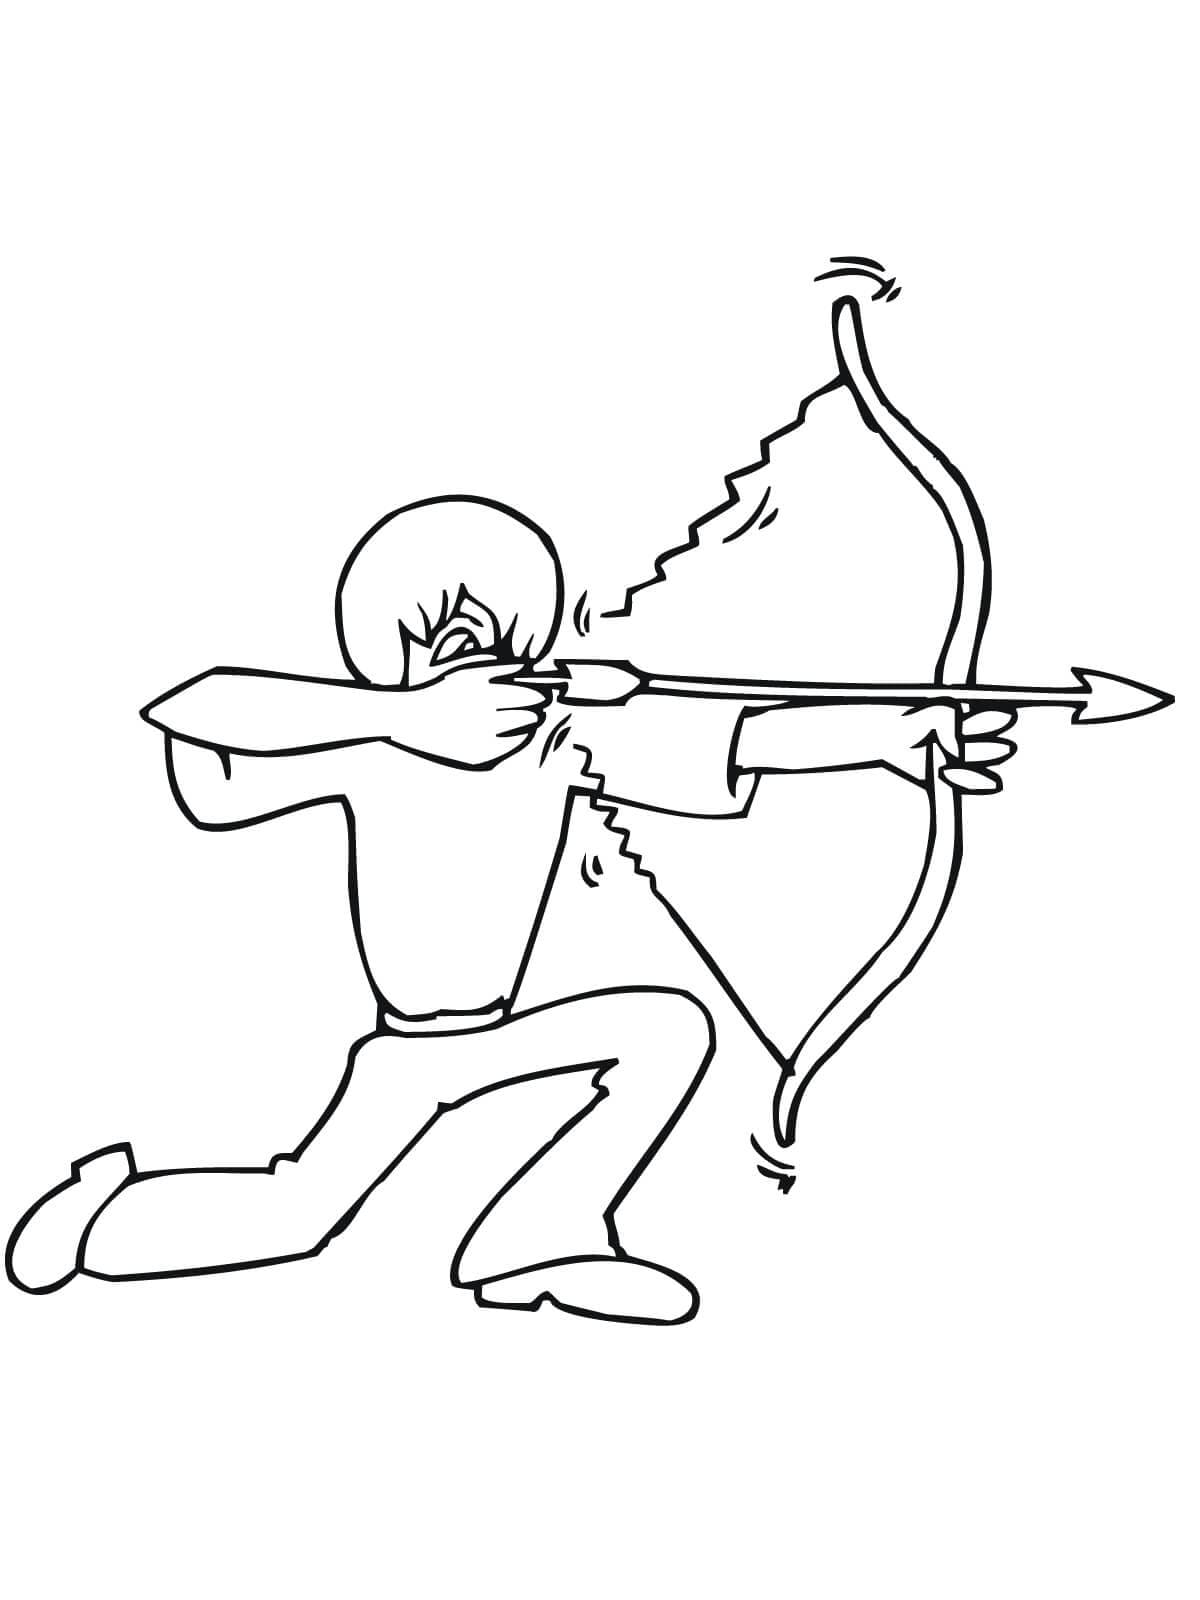 Archer For Kids Coloring Page